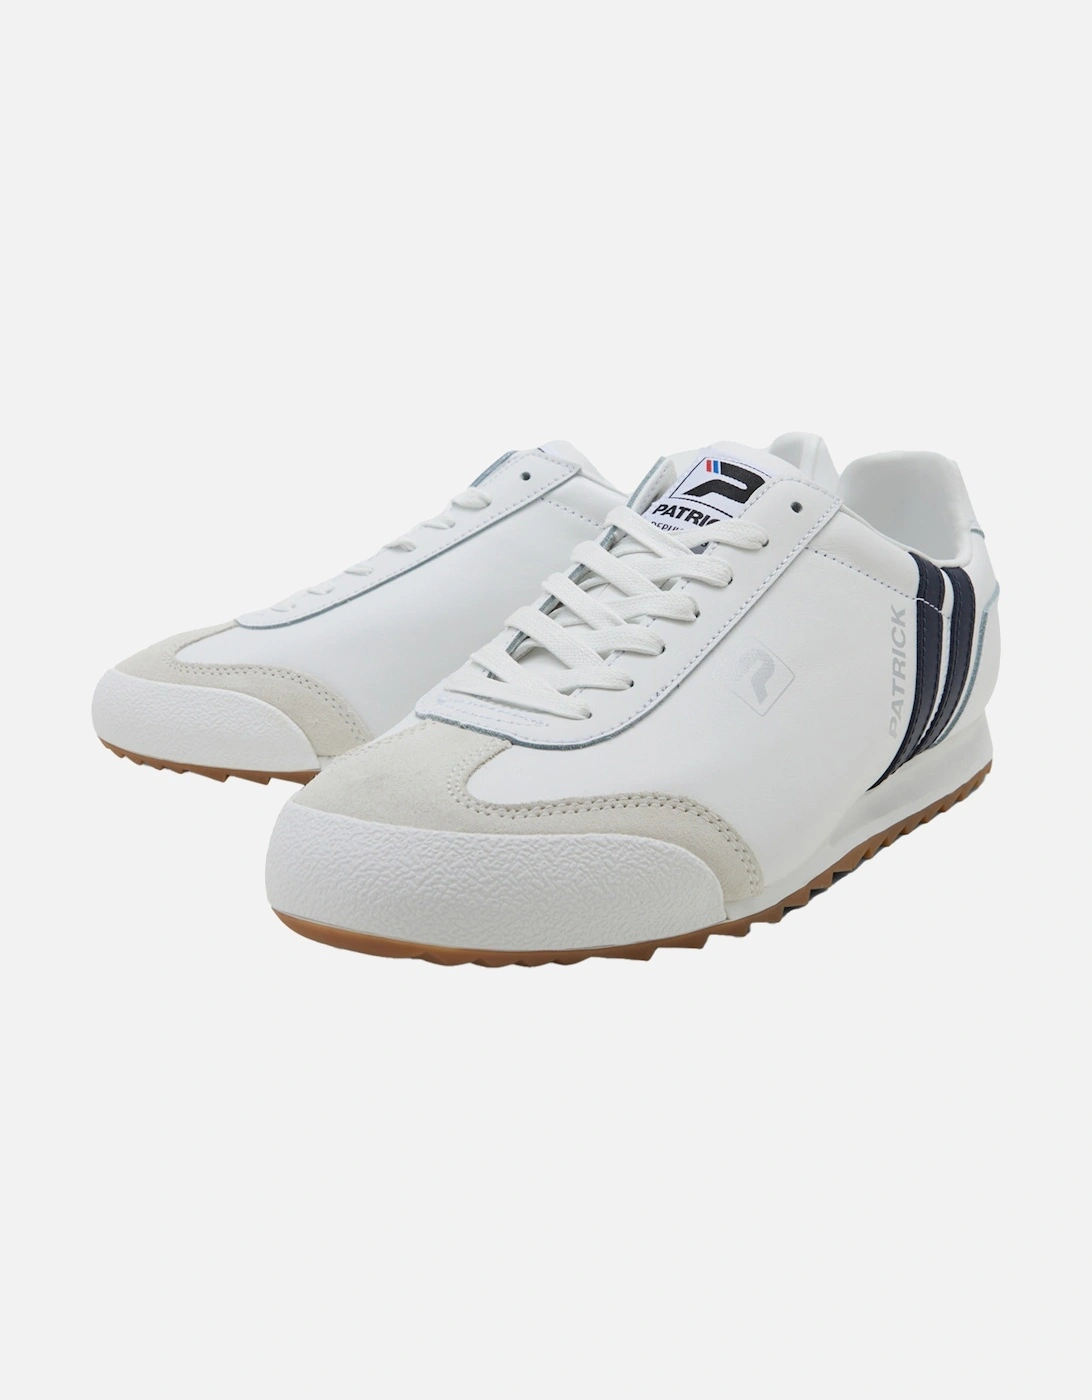 Mens Liverpool Trainers (White/Navy)